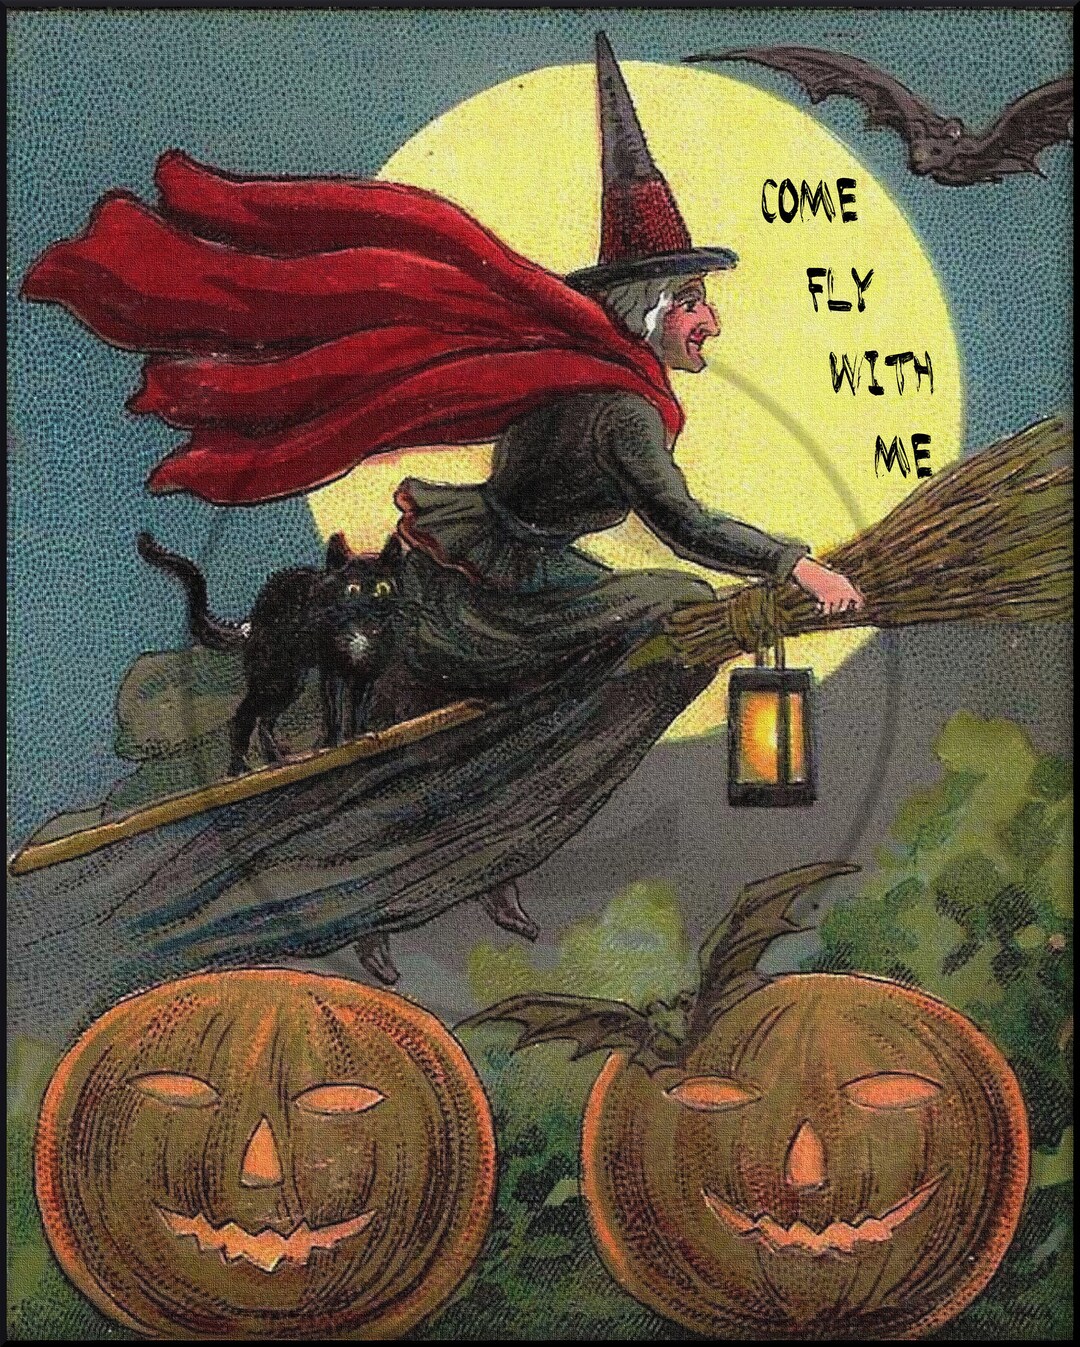 Witch　Online　Vintage　India　Halloween　Etsy　Wall　With　Come　Fly　Me　in　Buy　Primitive